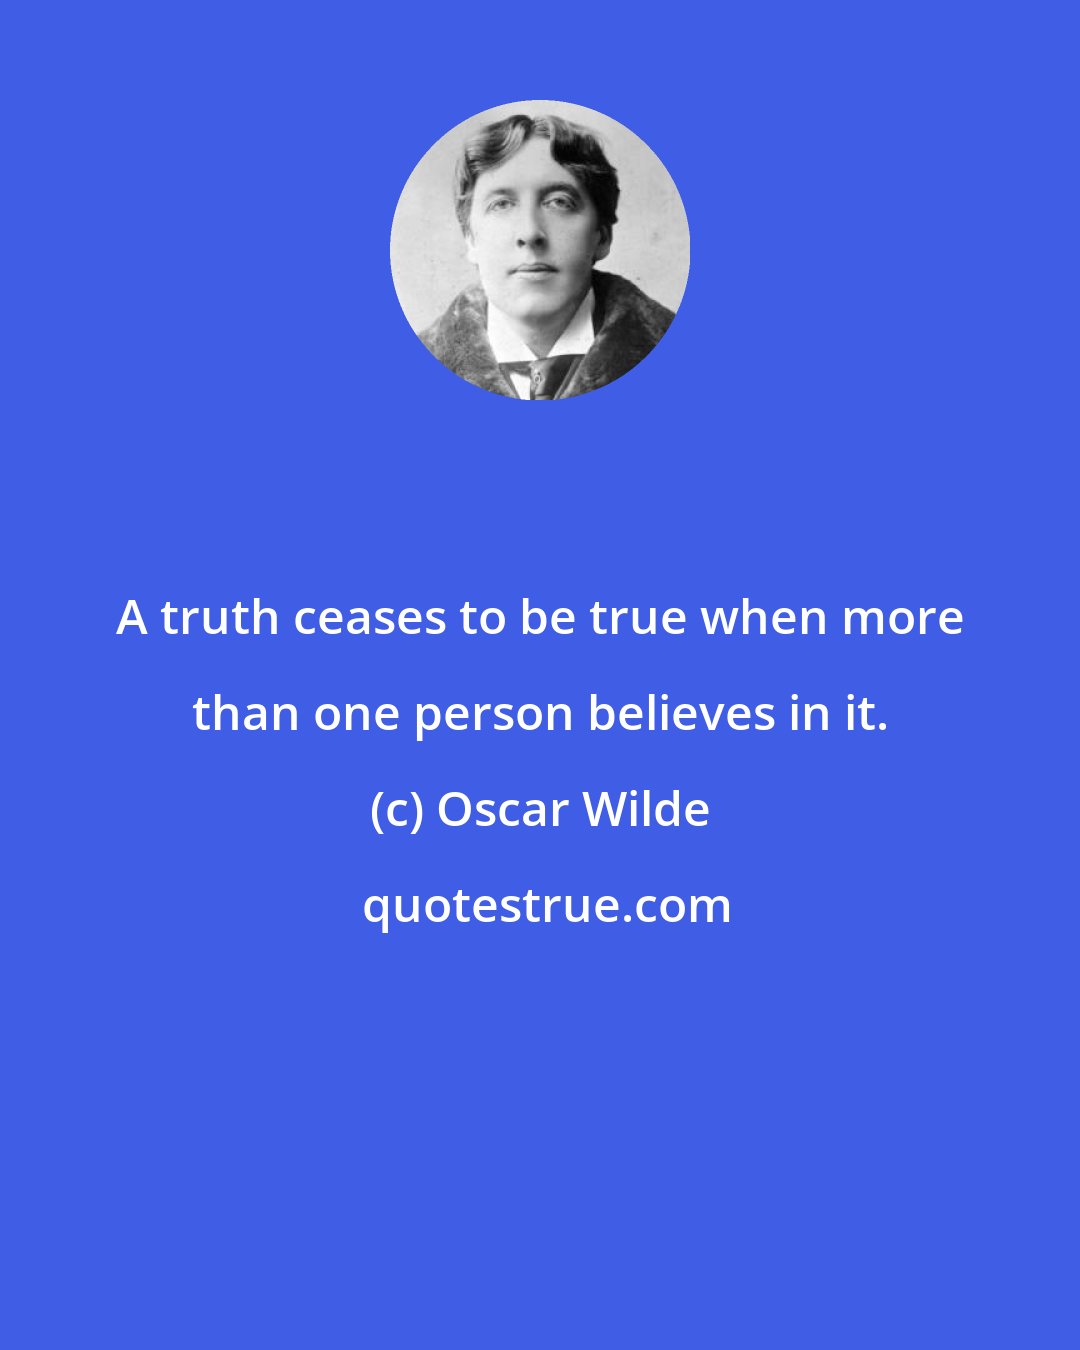 Oscar Wilde: A truth ceases to be true when more than one person believes in it.